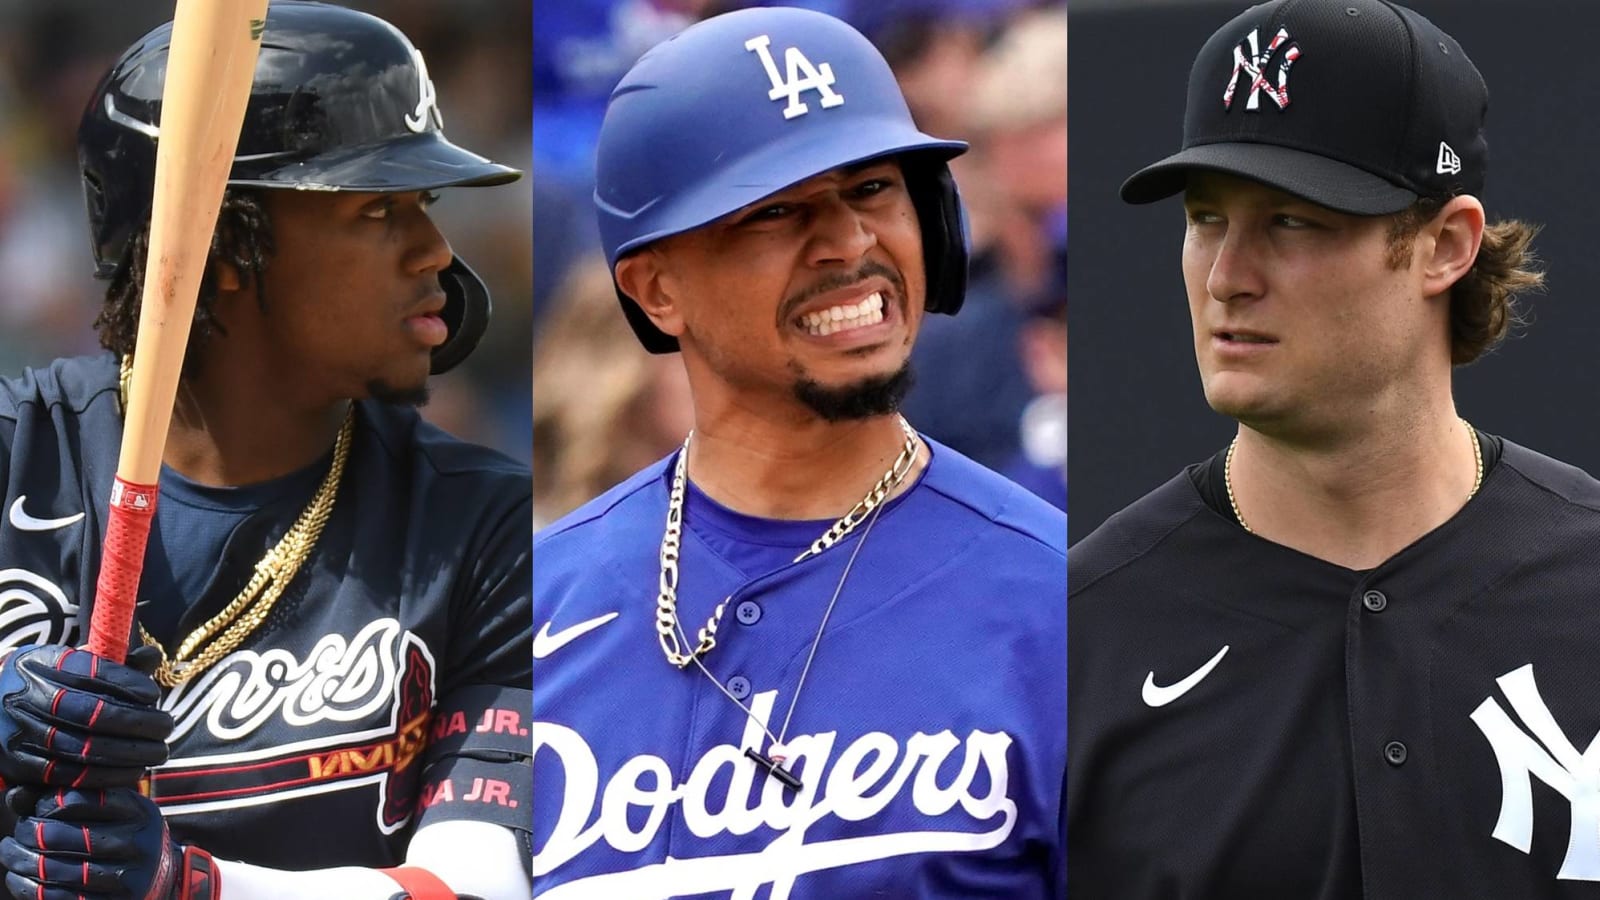 These MLB pros are from New Jersey